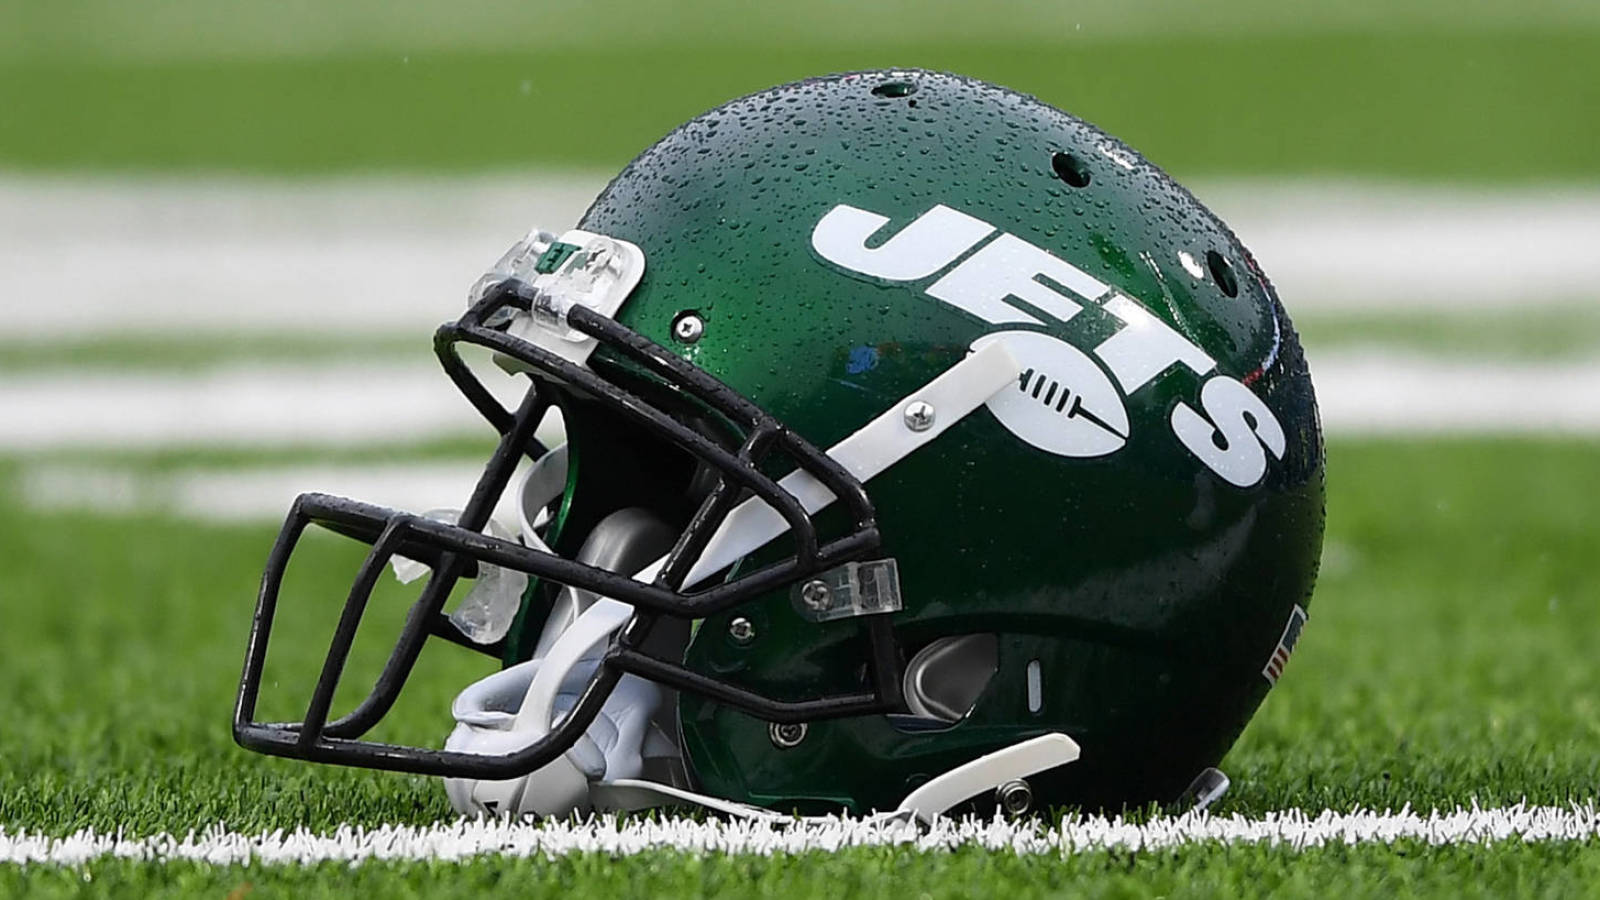 Jets assistant coach Greg Knapp critically injured in bike accident